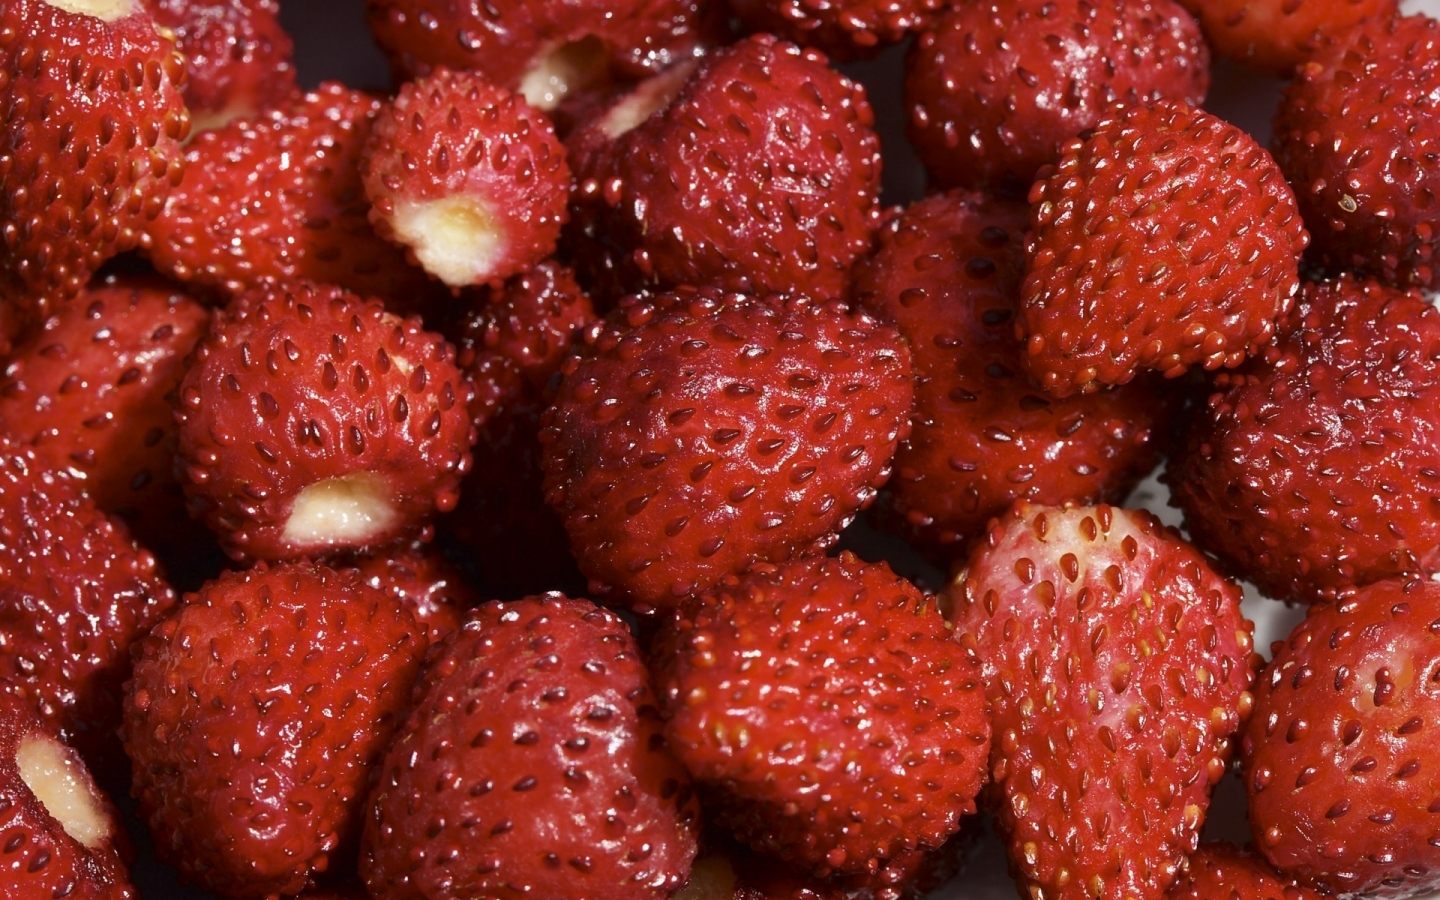 Strawberries for 1440 x 900 widescreen resolution